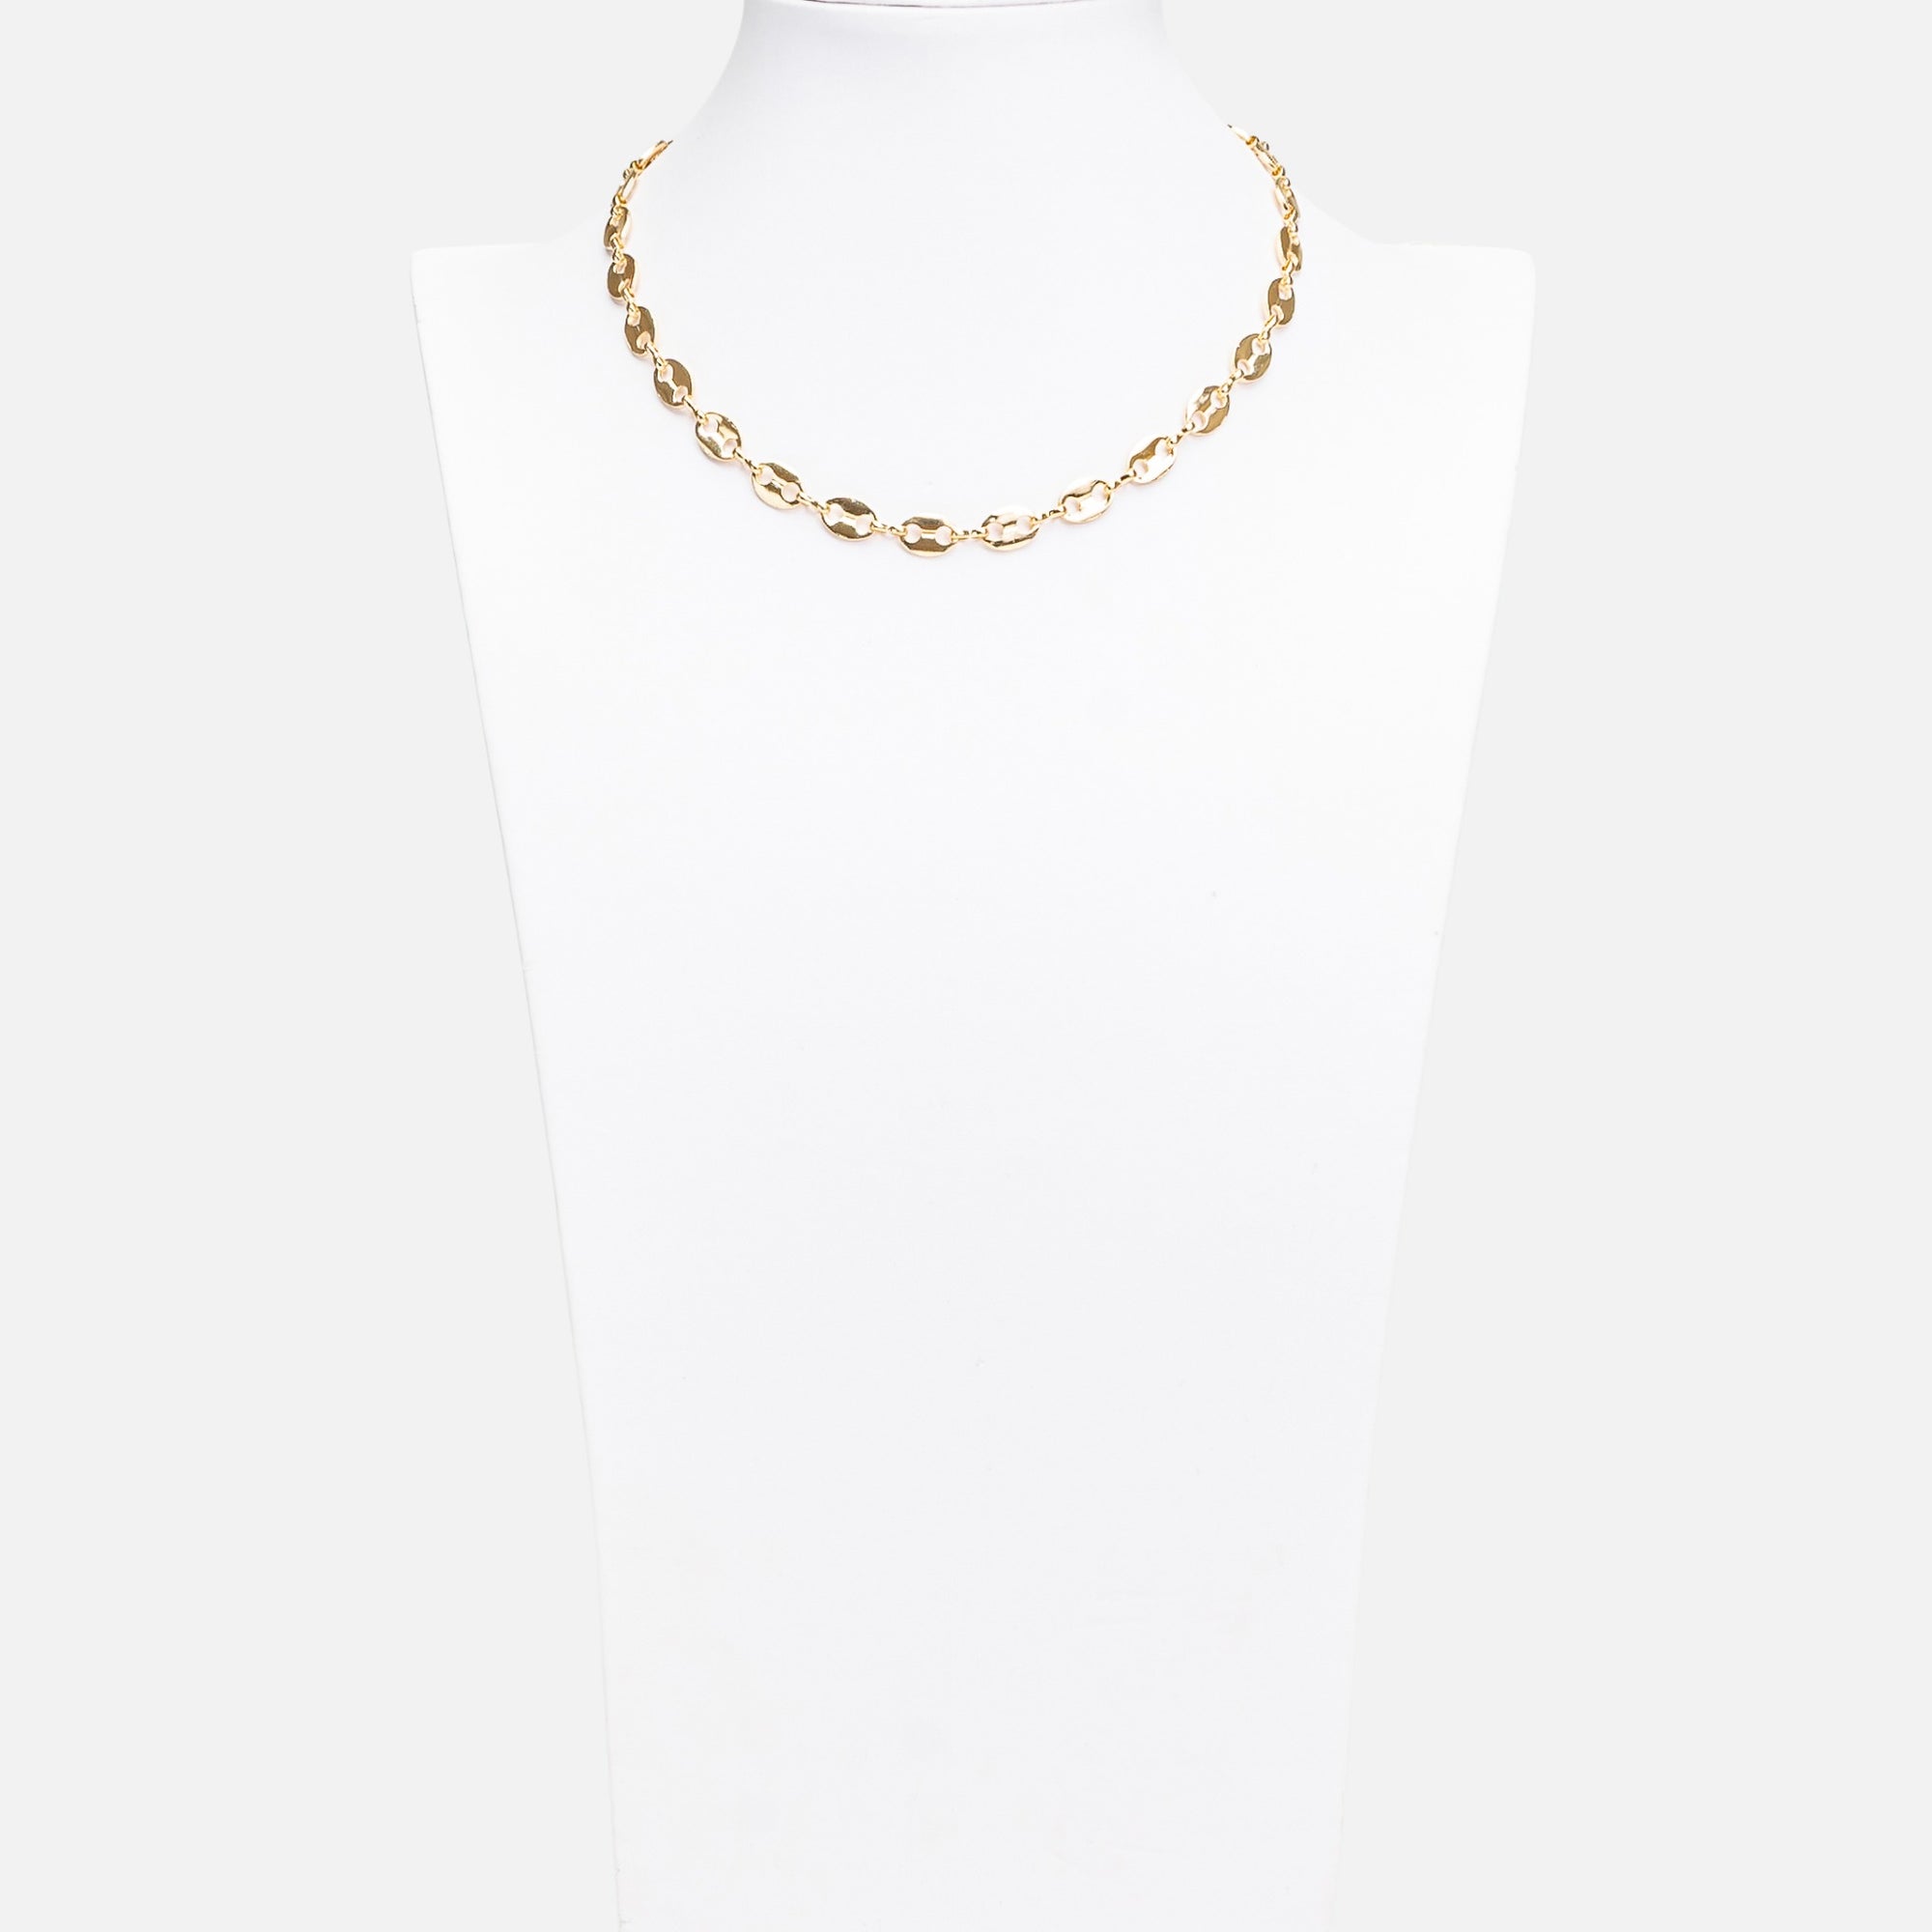 Golden necklace with anchor mesh